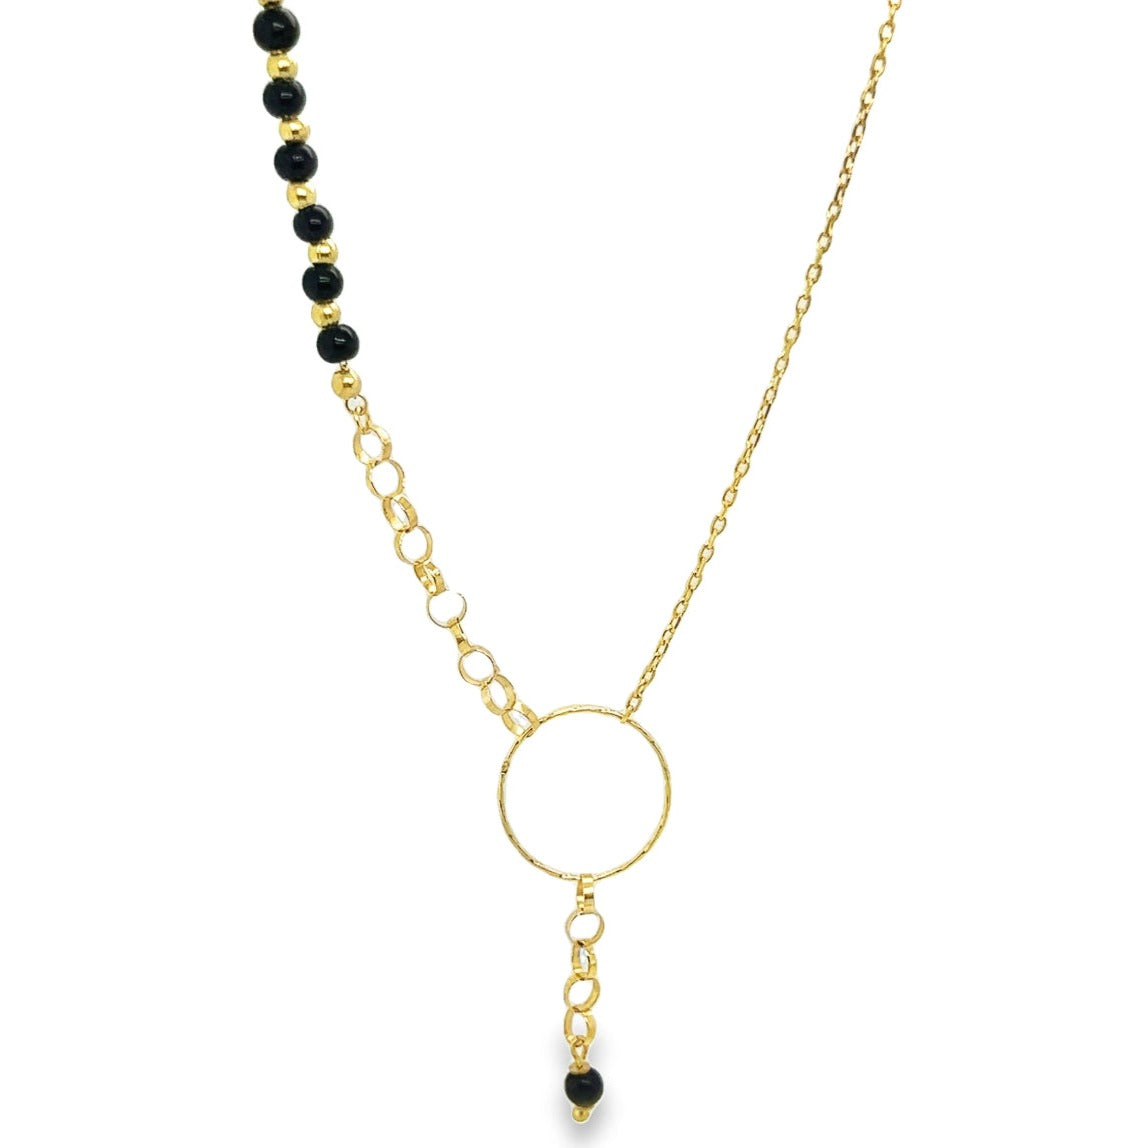 Perfect Gold Necklace With a Ring in Center in 18K Yellow gold - J-P007A